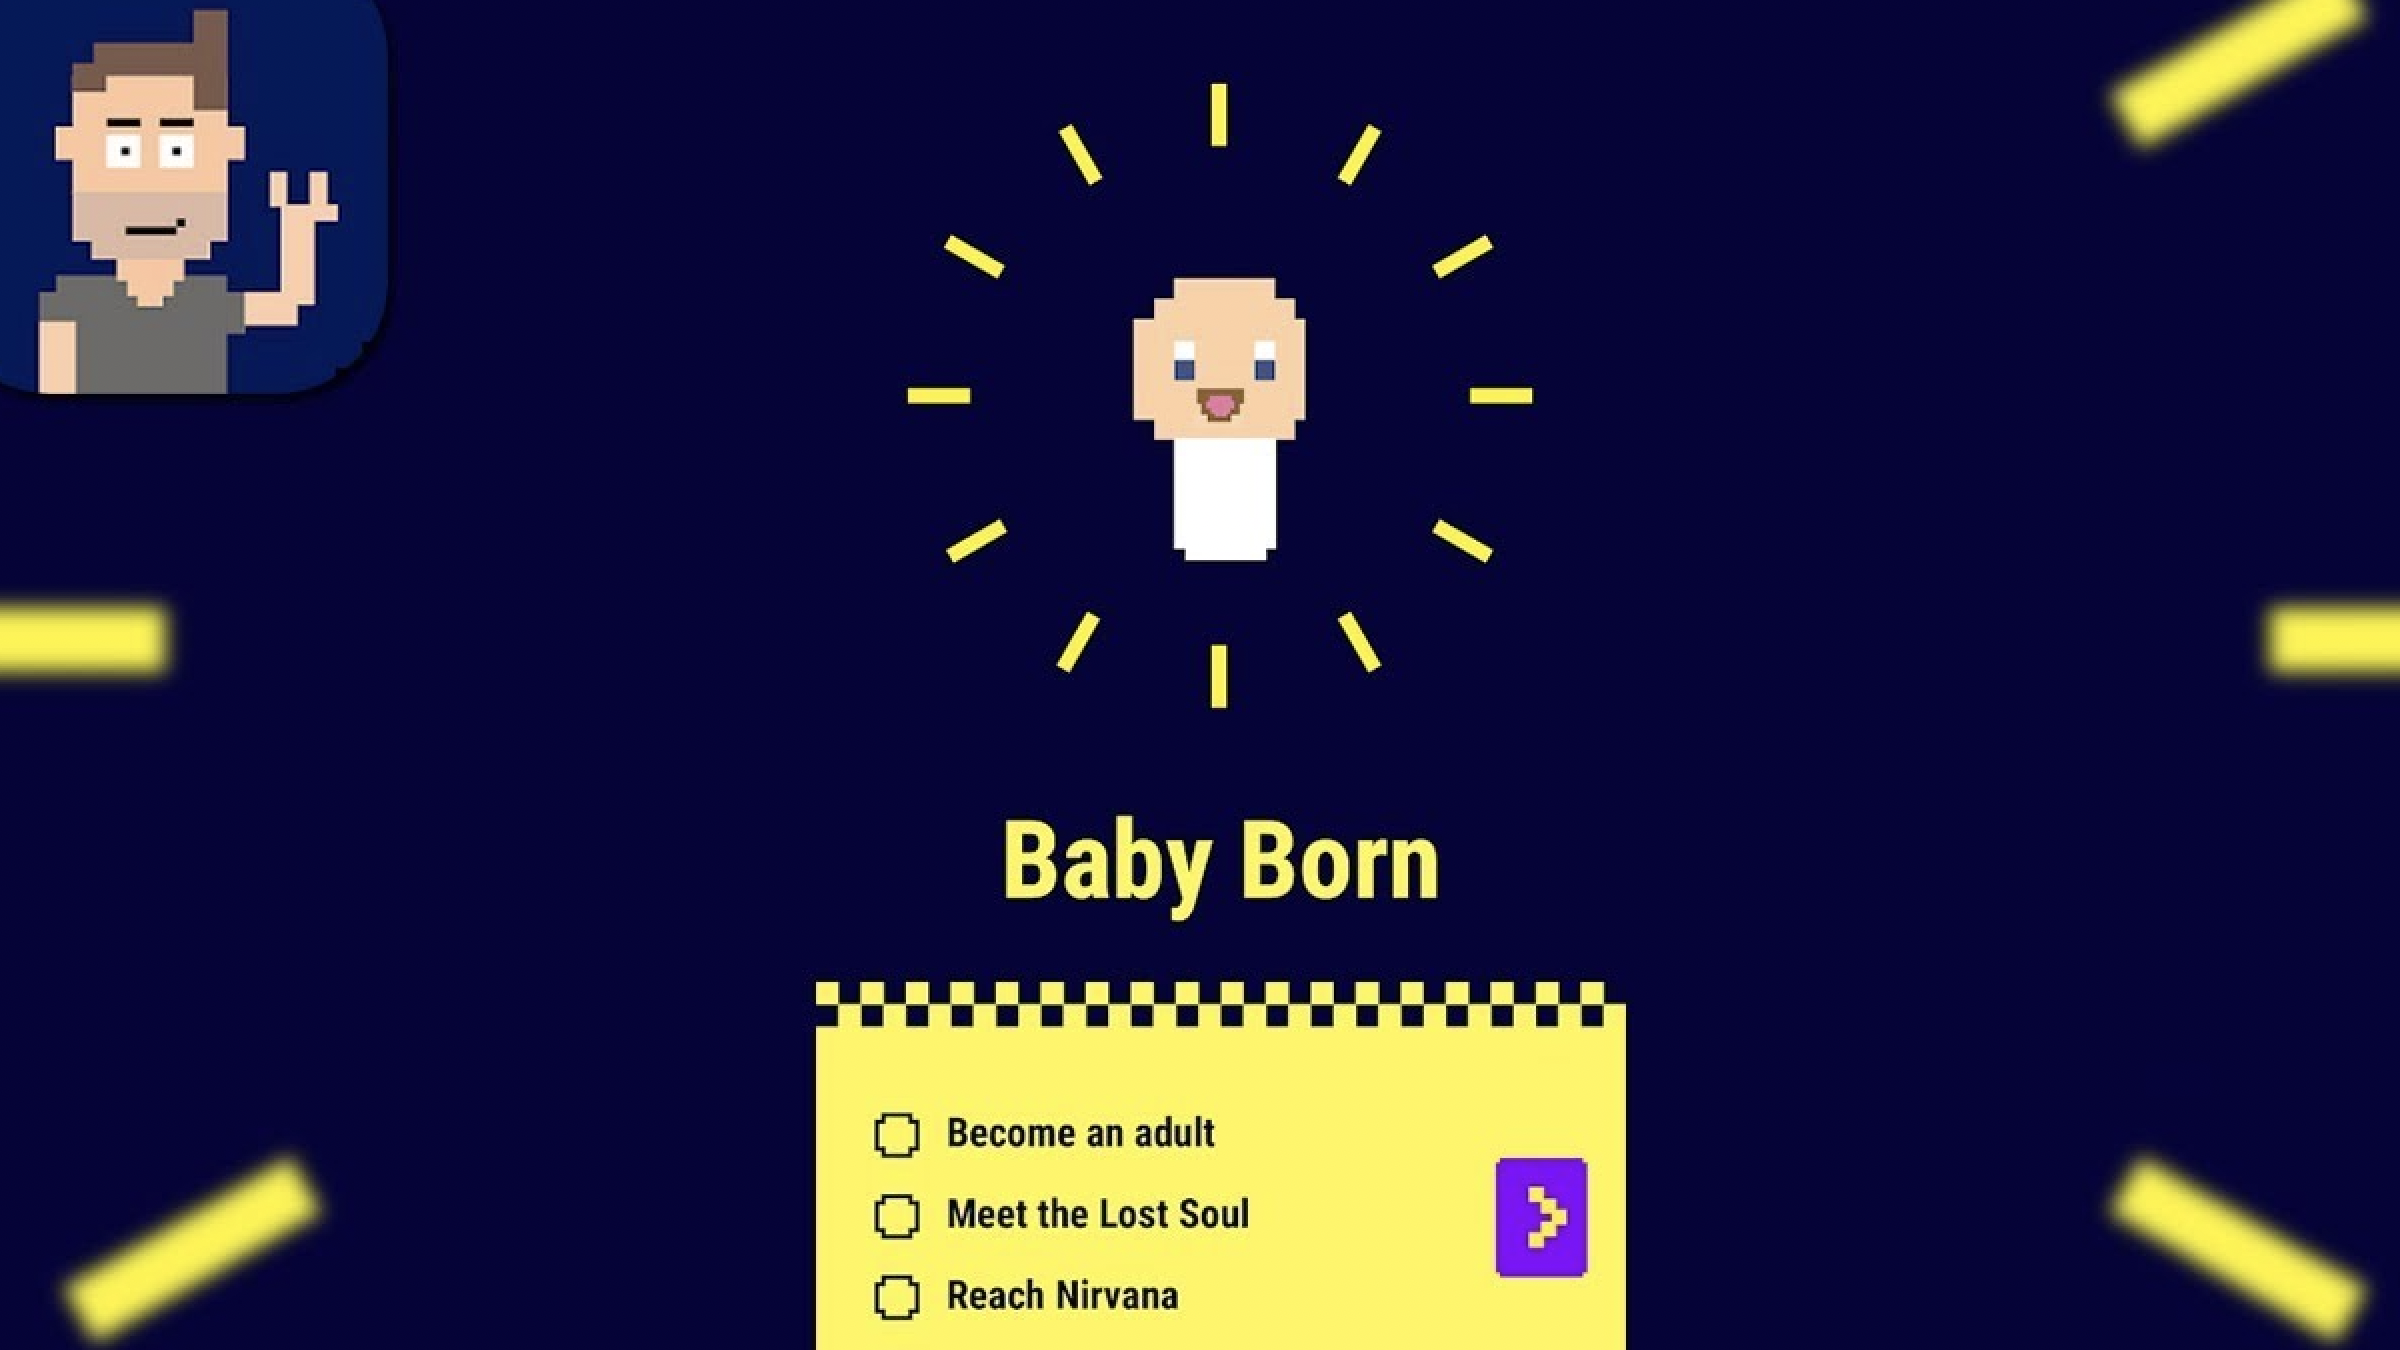 A tiny pexel man with stubble and a brown pompador haircul looks on as a tiny pixel baby which resembles a lightbult hovers. Test reads "Baby Born" and below it is a list of goals including, "Become an Aduld. Meet the Lost Soul. Reach Nirvana." The background is either a dark navy or black.